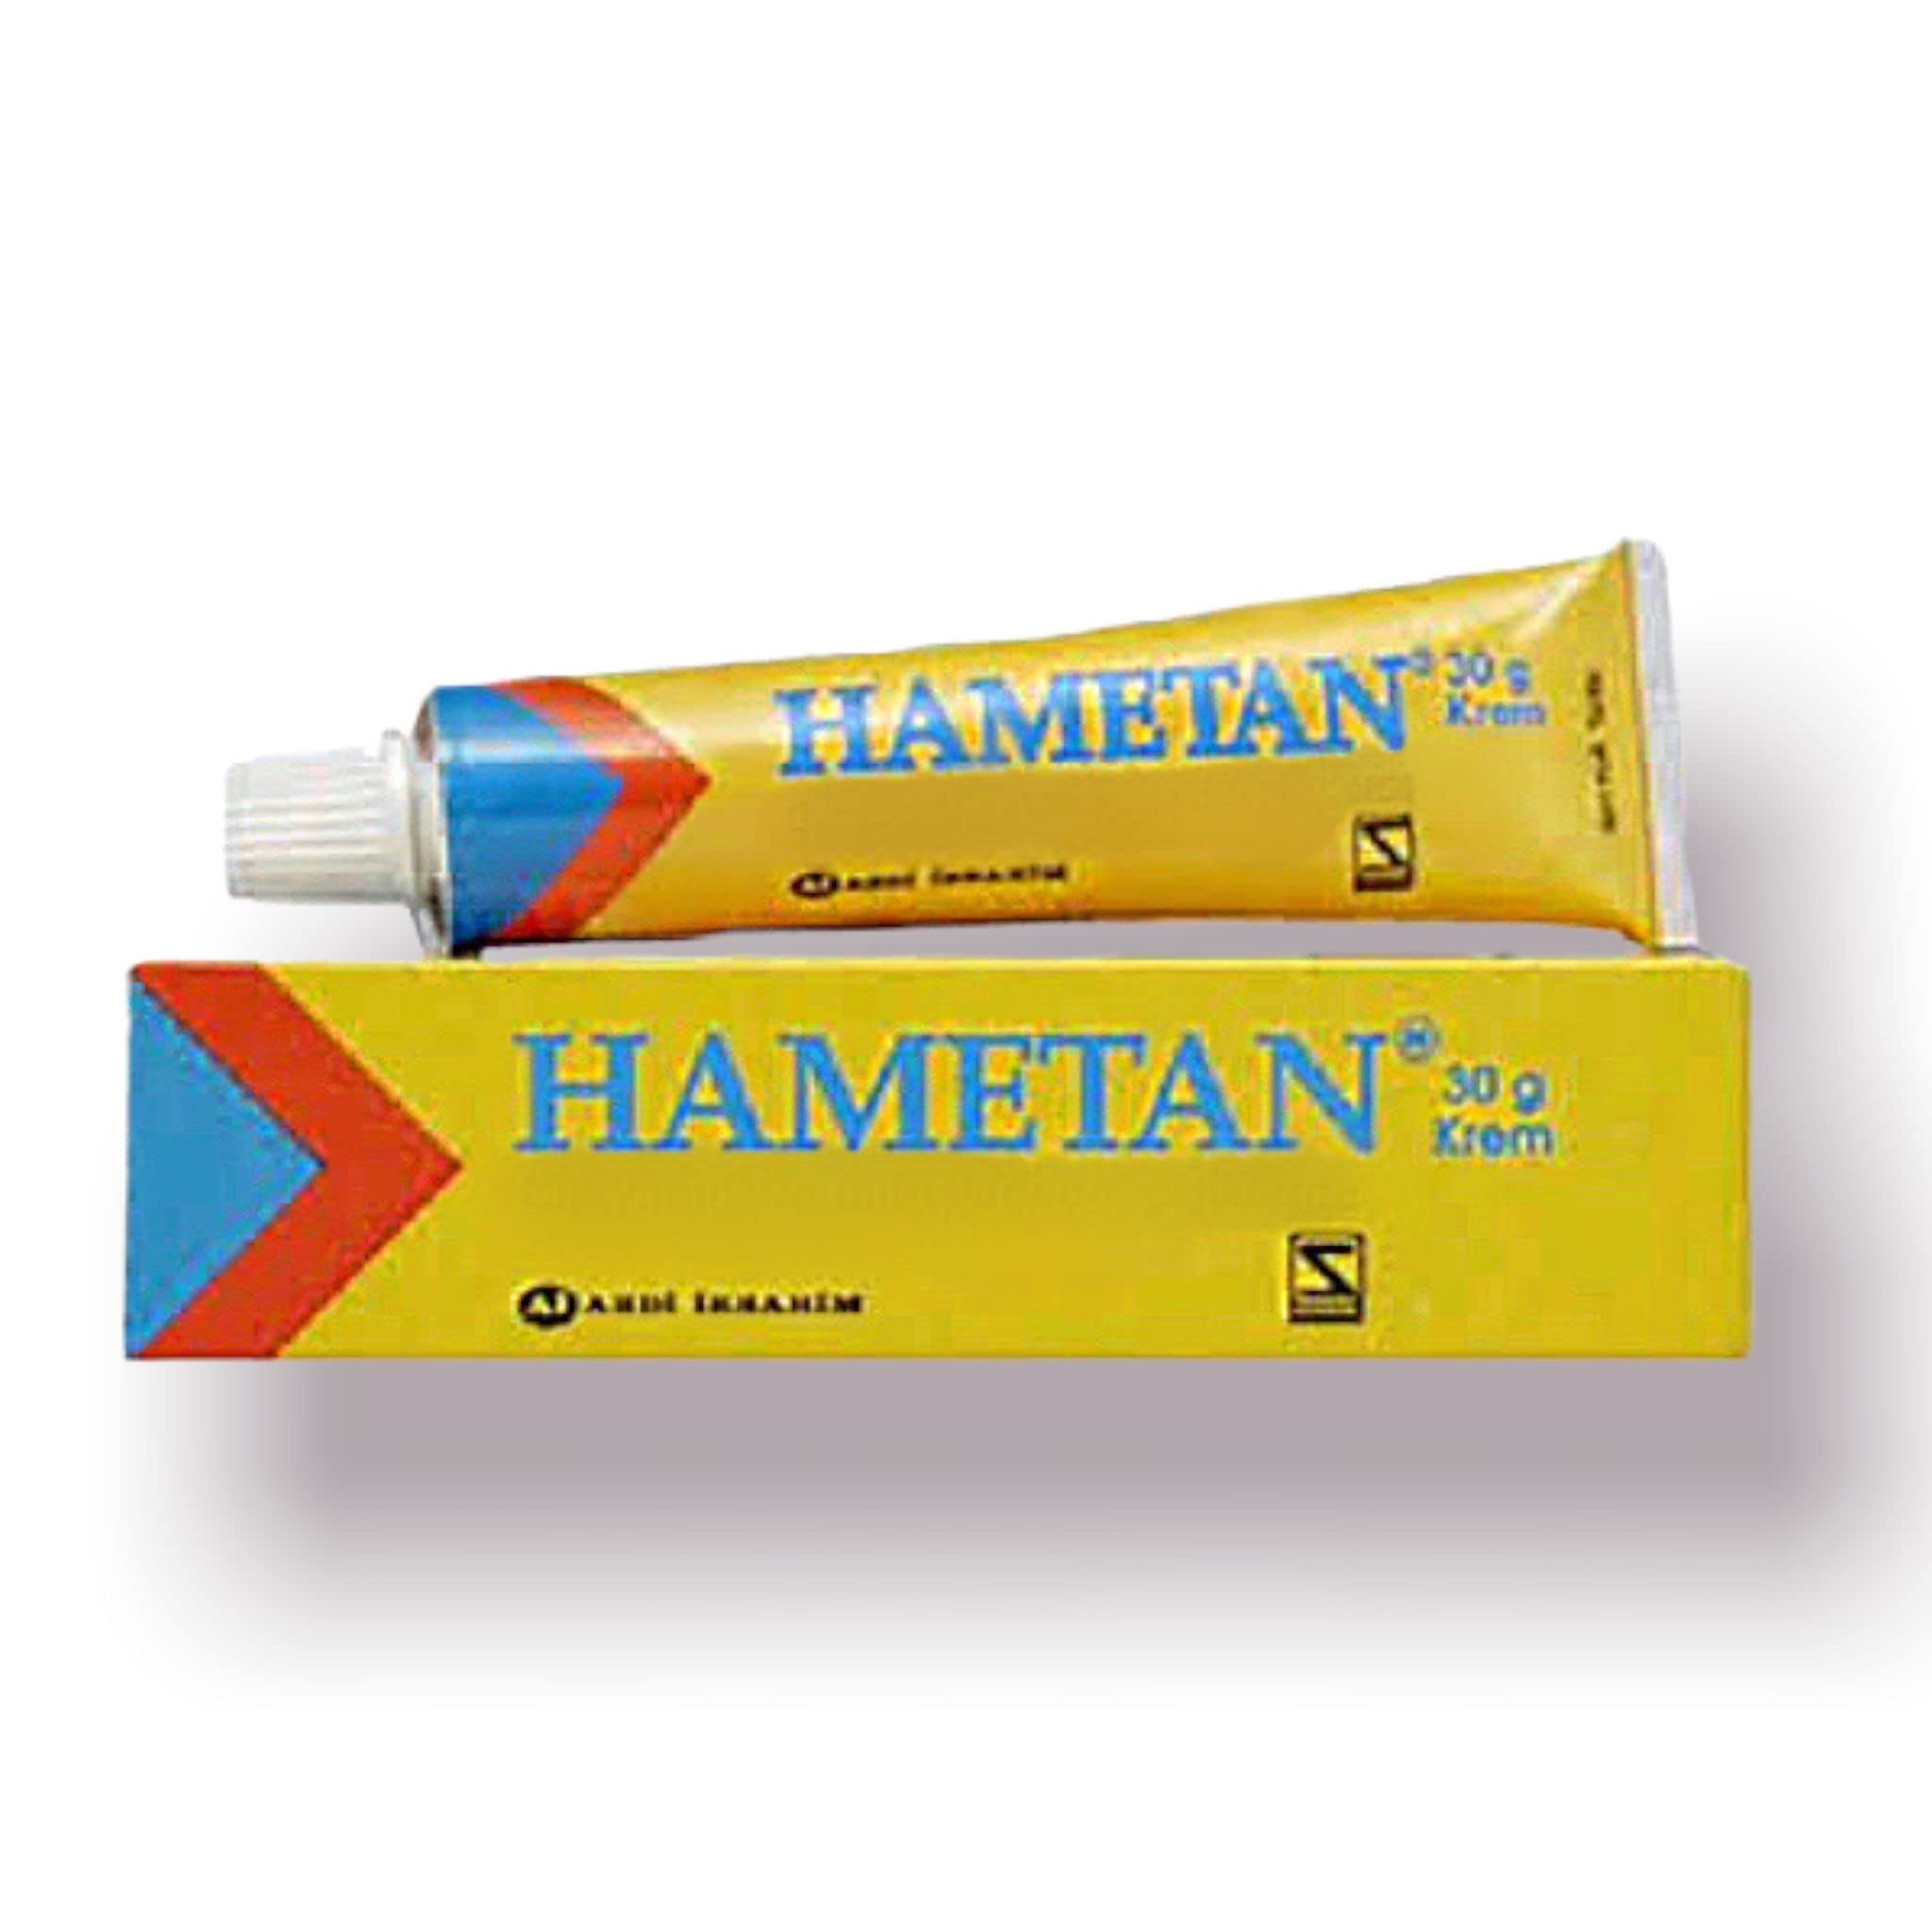 hametan %5.35 (Witch Hazel-Hamamelis virginiana) 30 gr Cream-removes acne scars,used in burns, nipple cracks, repairs dry chapped, damaged skin,bedsores,wounds,used for diaper rash in babies.